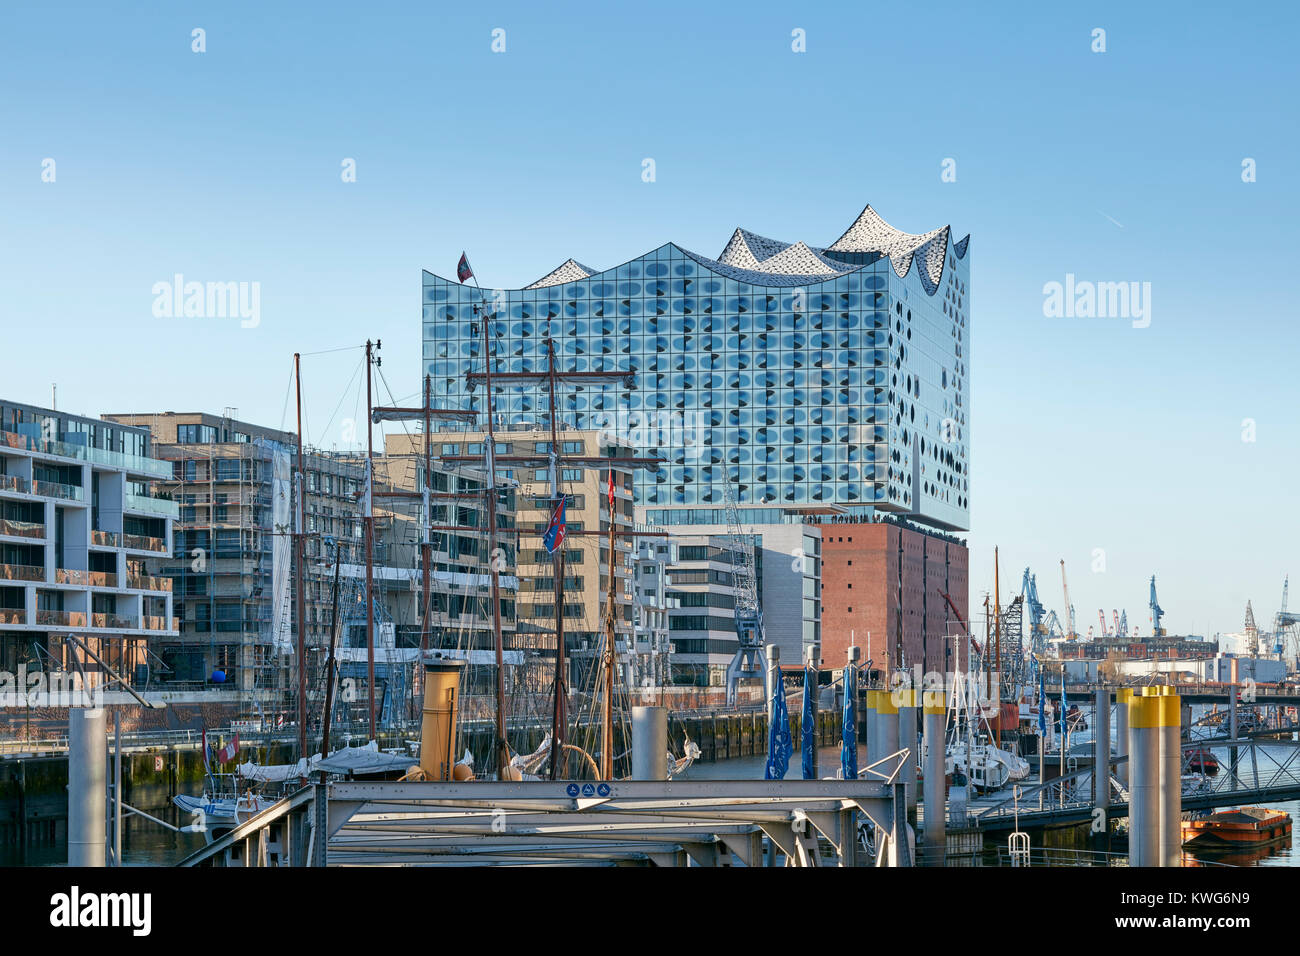 Elbphilharmonie, concert hall by architects Herzog and de Meuron at the River Elbe, HafenCity, Hamburg, Germany. Stock Photo